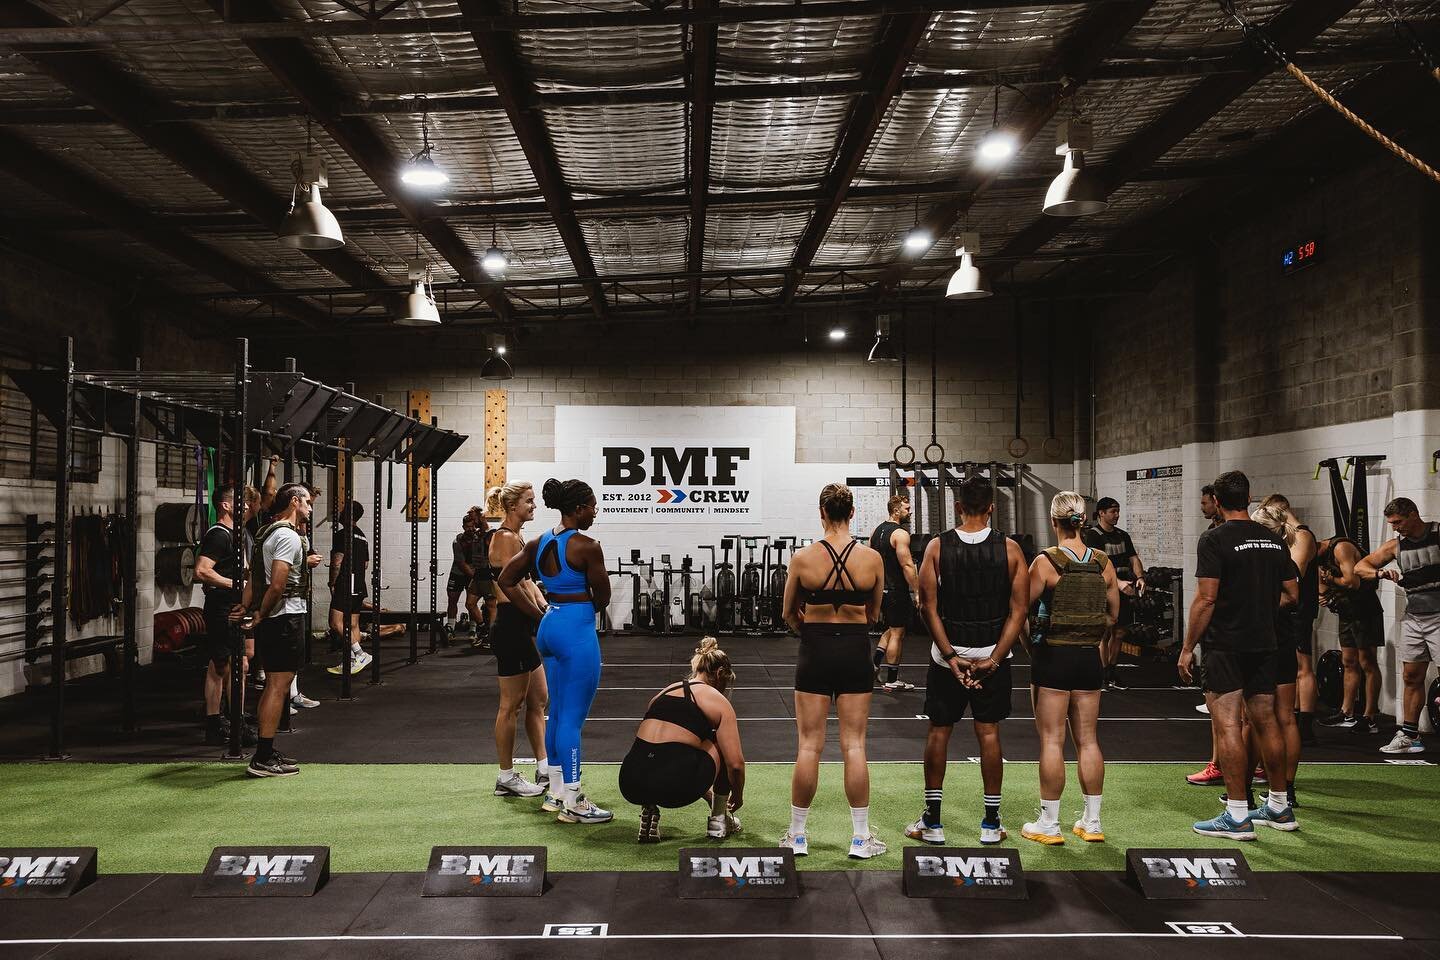 B|M|F - The Body + Mind Factory ⚡️
Changing bodies AND minds.